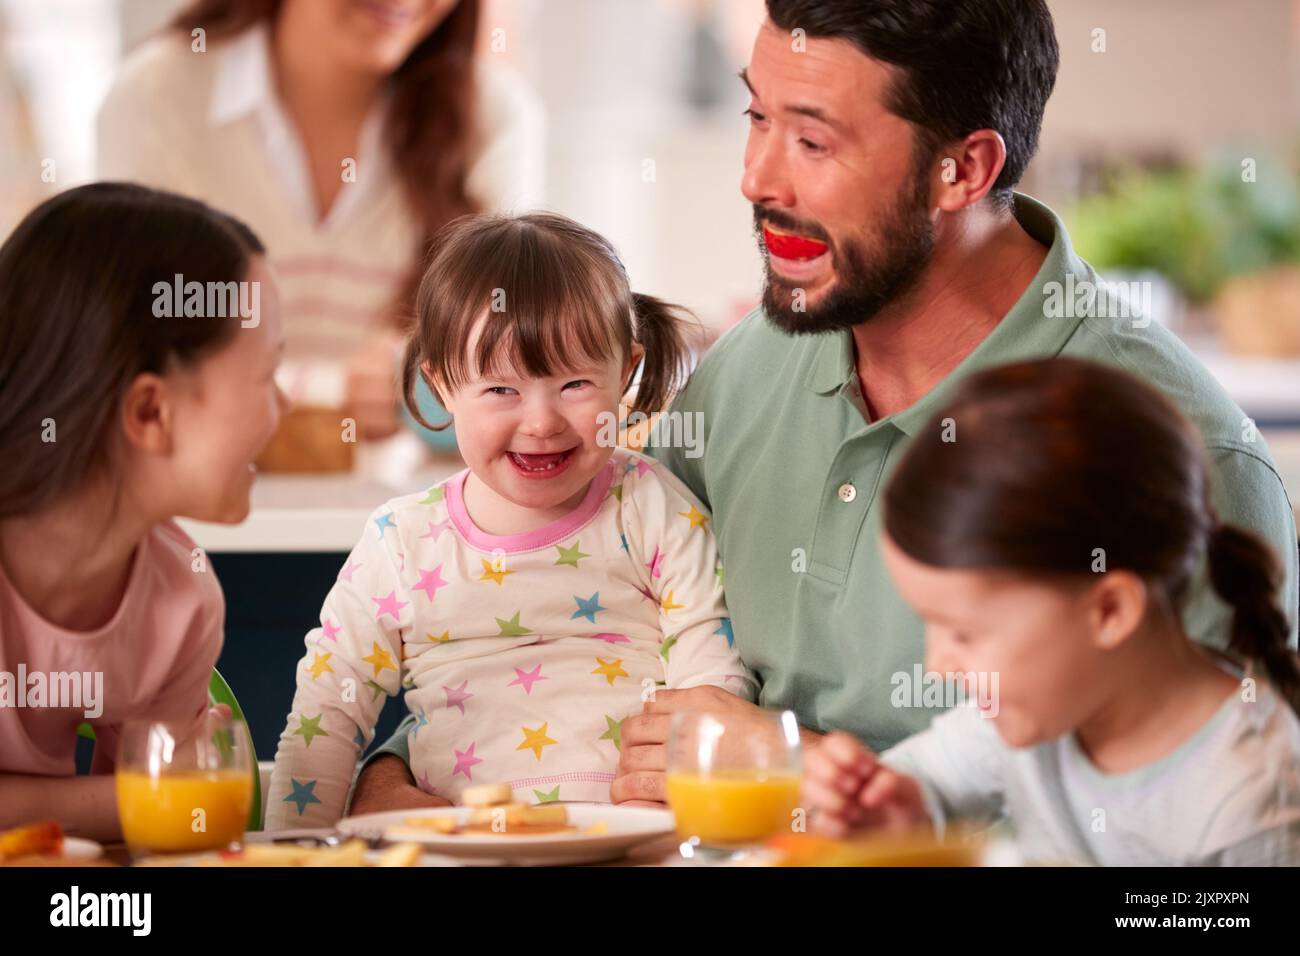 Father Making Funny Face As Family With Down Syndrome Daughter Eat Breakfast At Home Stock Photo